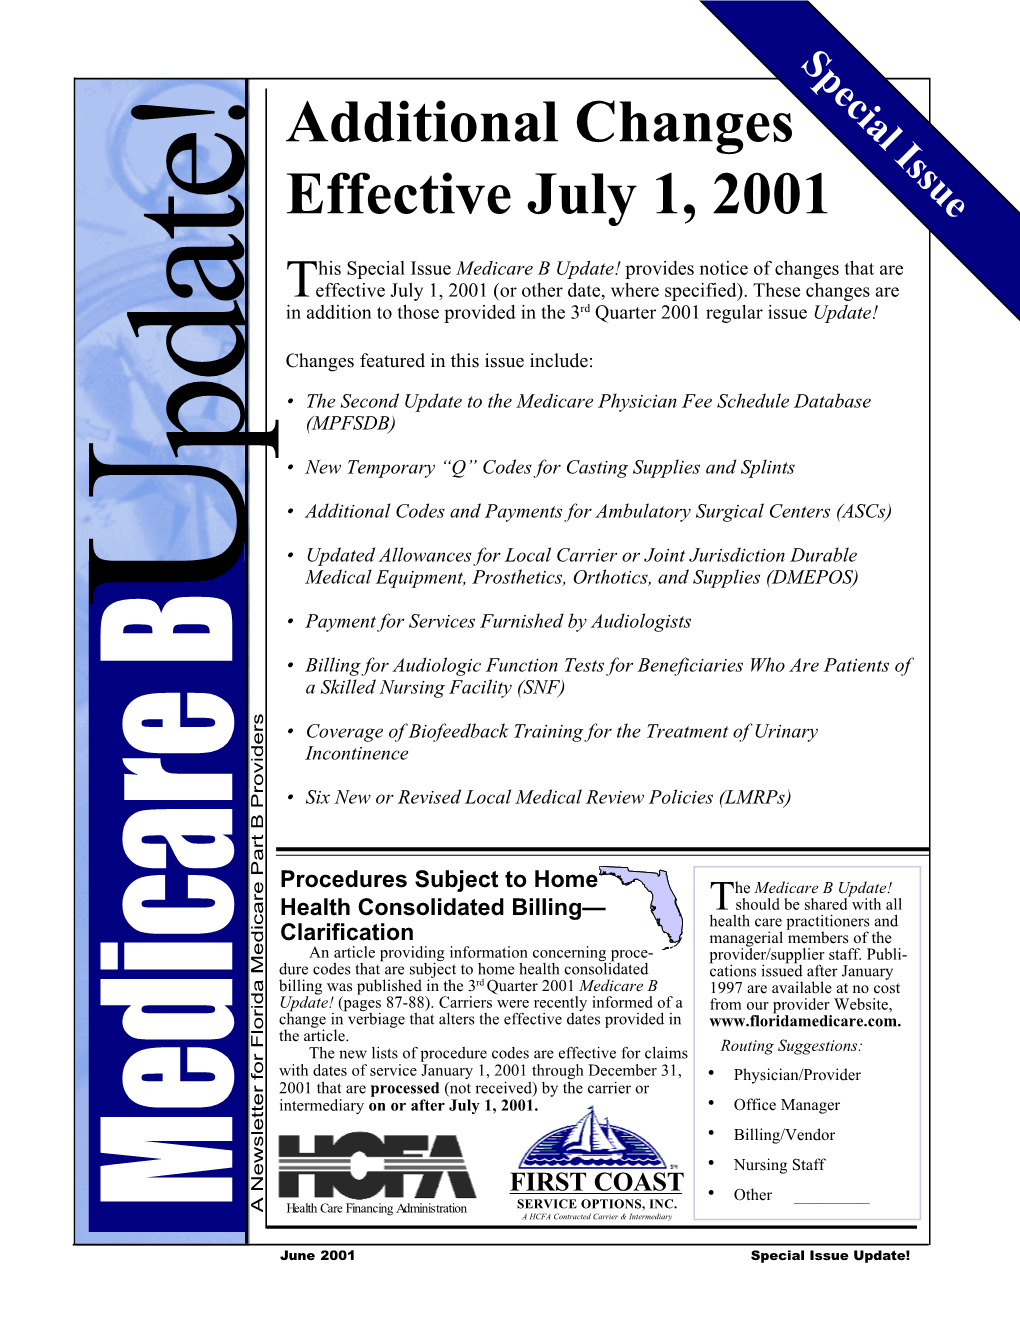 June 2001 Special Issue Update! TABLE of CONTENTS